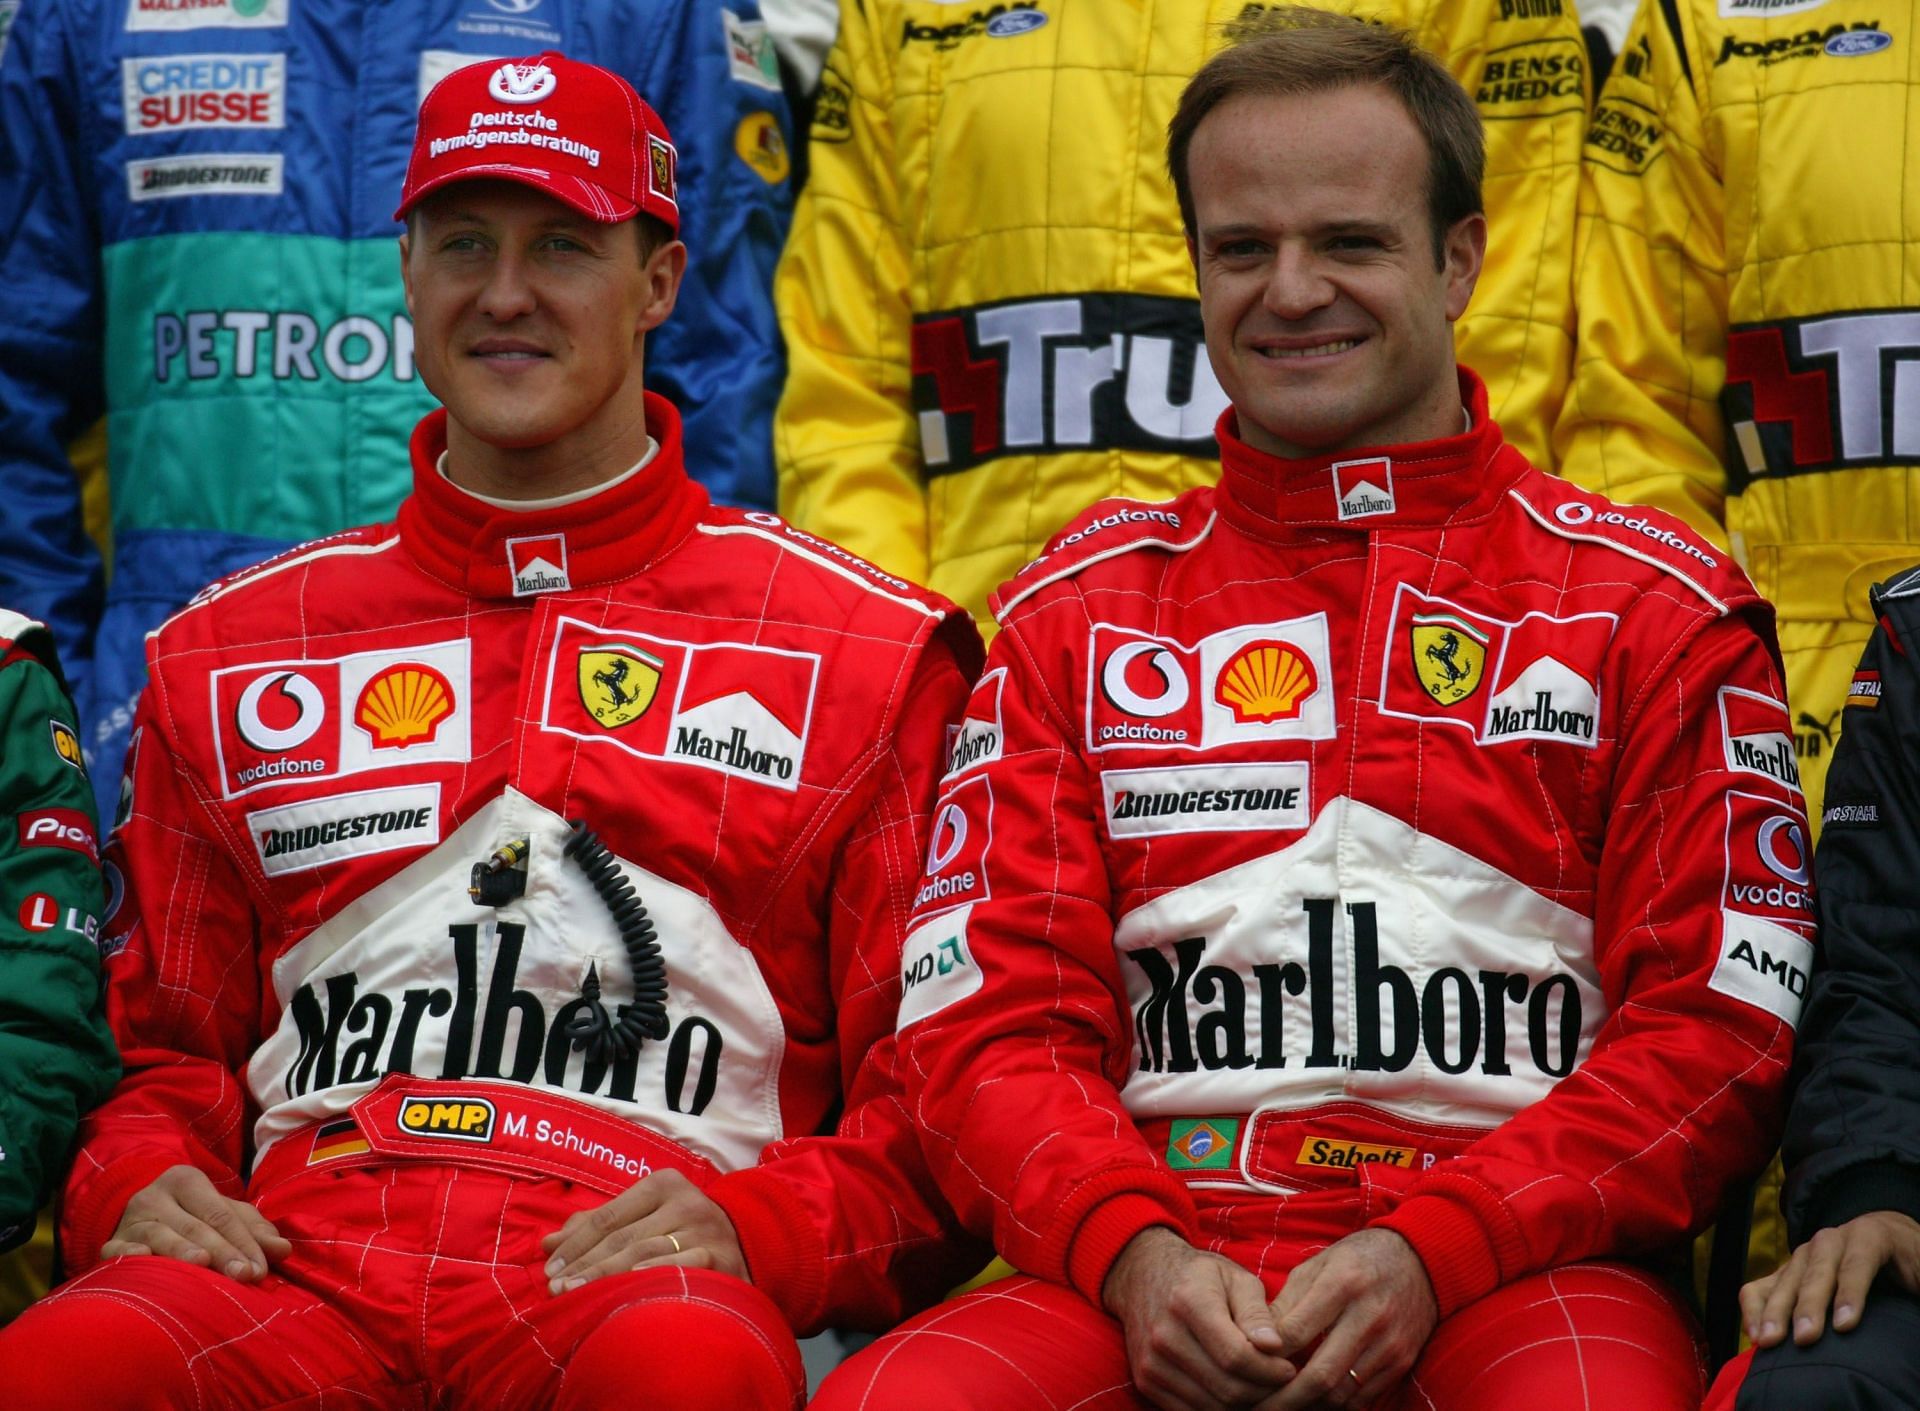 The iconic duo of Michael Schumacher and Rubens Barrichello propelled Ferrari to five consecutive titles